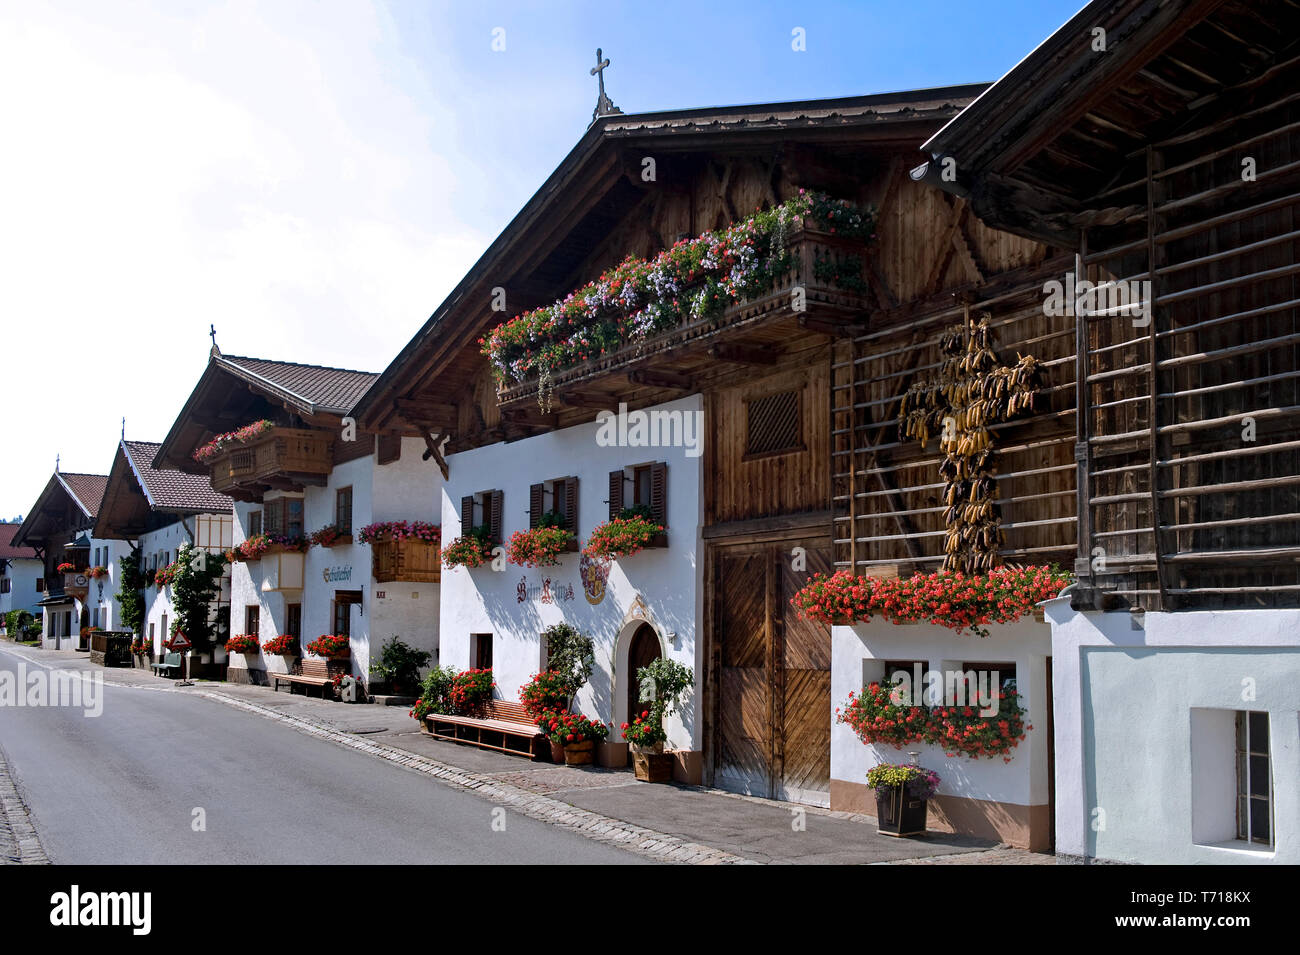 Mutters, Tyrol/ Austria: The main road  lined with traditional tirolian houses heavily decorated with geraniums Stock Photo